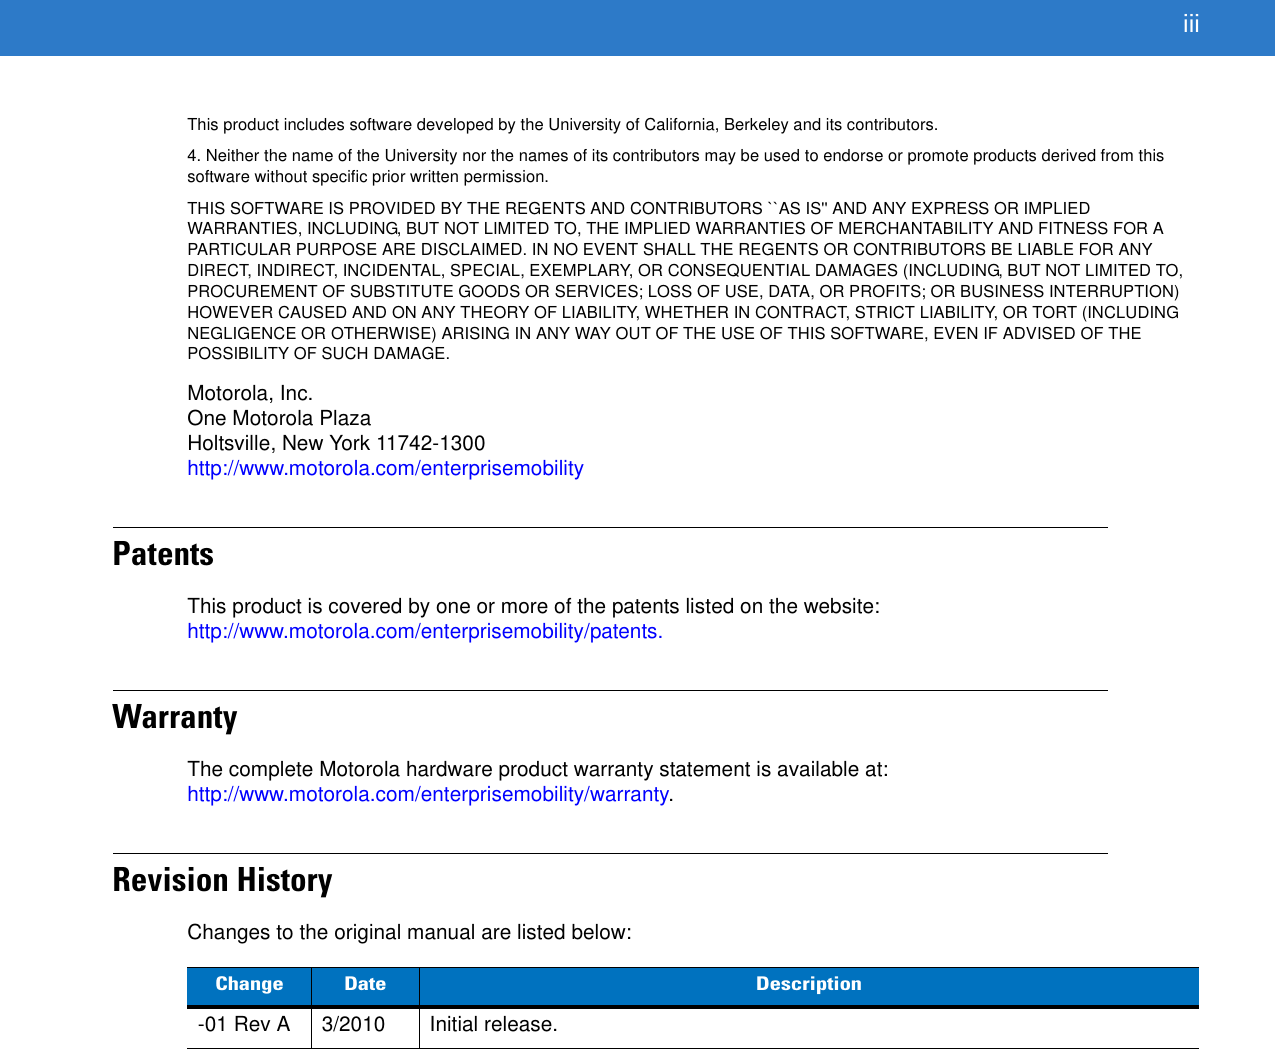  iiiThis product includes software developed by the University of California, Berkeley and its contributors.4. Neither the name of the University nor the names of its contributors may be used to endorse or promote products derived from this software without specific prior written permission.THIS SOFTWARE IS PROVIDED BY THE REGENTS AND CONTRIBUTORS ``AS IS&apos;&apos; AND ANY EXPRESS OR IMPLIED WARRANTIES, INCLUDING, BUT NOT LIMITED TO, THE IMPLIED WARRANTIES OF MERCHANTABILITY AND FITNESS FOR A PARTICULAR PURPOSE ARE DISCLAIMED. IN NO EVENT SHALL THE REGENTS OR CONTRIBUTORS BE LIABLE FOR ANY DIRECT, INDIRECT, INCIDENTAL, SPECIAL, EXEMPLARY, OR CONSEQUENTIAL DAMAGES (INCLUDING, BUT NOT LIMITED TO, PROCUREMENT OF SUBSTITUTE GOODS OR SERVICES; LOSS OF USE, DATA, OR PROFITS; OR BUSINESS INTERRUPTION) HOWEVER CAUSED AND ON ANY THEORY OF LIABILITY, WHETHER IN CONTRACT, STRICT LIABILITY, OR TORT (INCLUDING NEGLIGENCE OR OTHERWISE) ARISING IN ANY WAY OUT OF THE USE OF THIS SOFTWARE, EVEN IF ADVISED OF THE POSSIBILITY OF SUCH DAMAGE.Motorola, Inc.One Motorola PlazaHoltsville, New York 11742-1300http://www.motorola.com/enterprisemobilityPatentsThis product is covered by one or more of the patents listed on the website: http://www.motorola.com/enterprisemobility/patents.WarrantyThe complete Motorola hardware product warranty statement is available at: http://www.motorola.com/enterprisemobility/warranty.Revision HistoryChanges to the original manual are listed below:Change Date Description-01 Rev A 3/2010 Initial release.